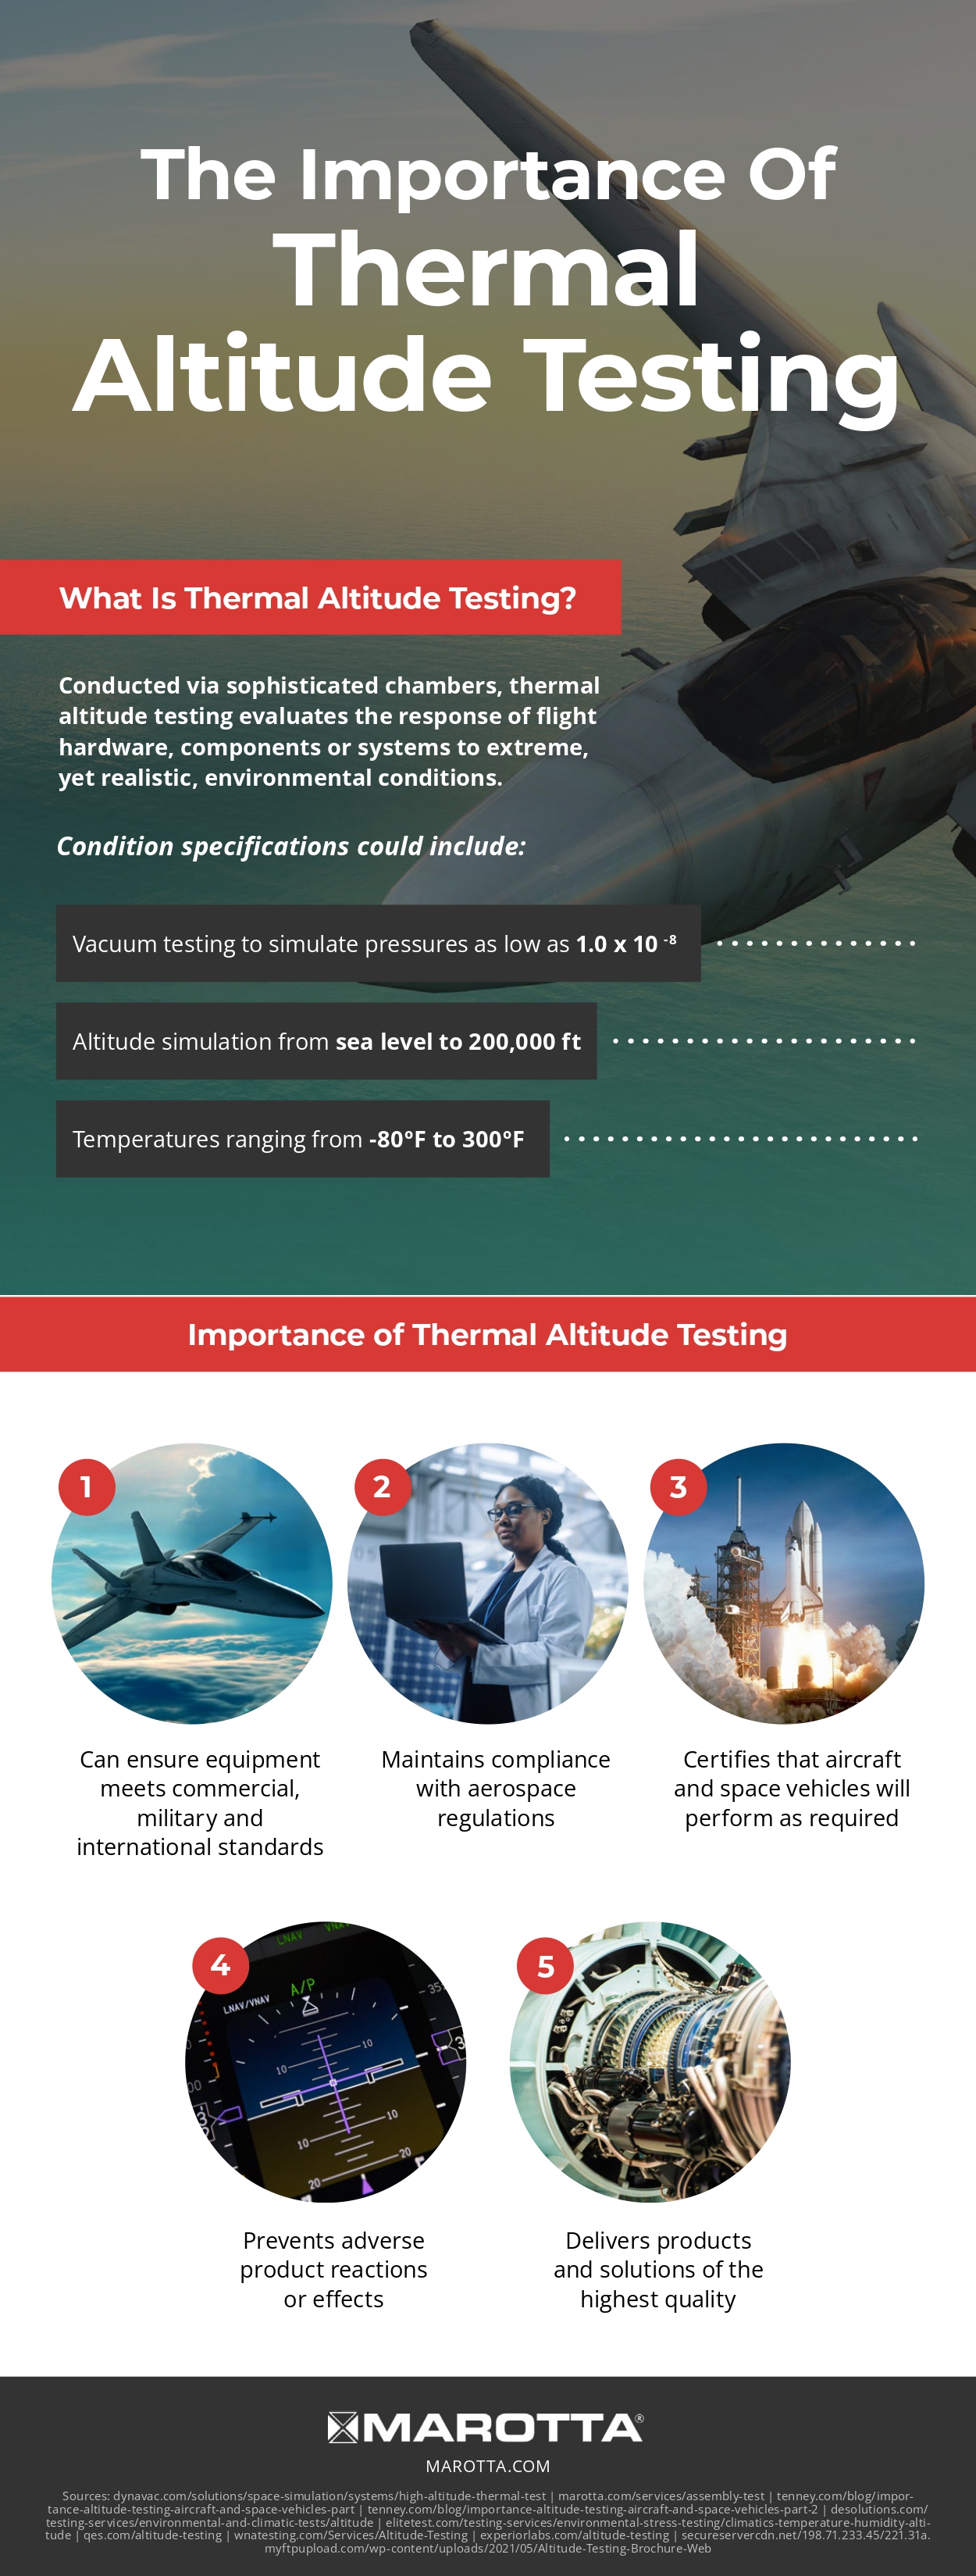 The Importance Of Thermal Altitude Testing